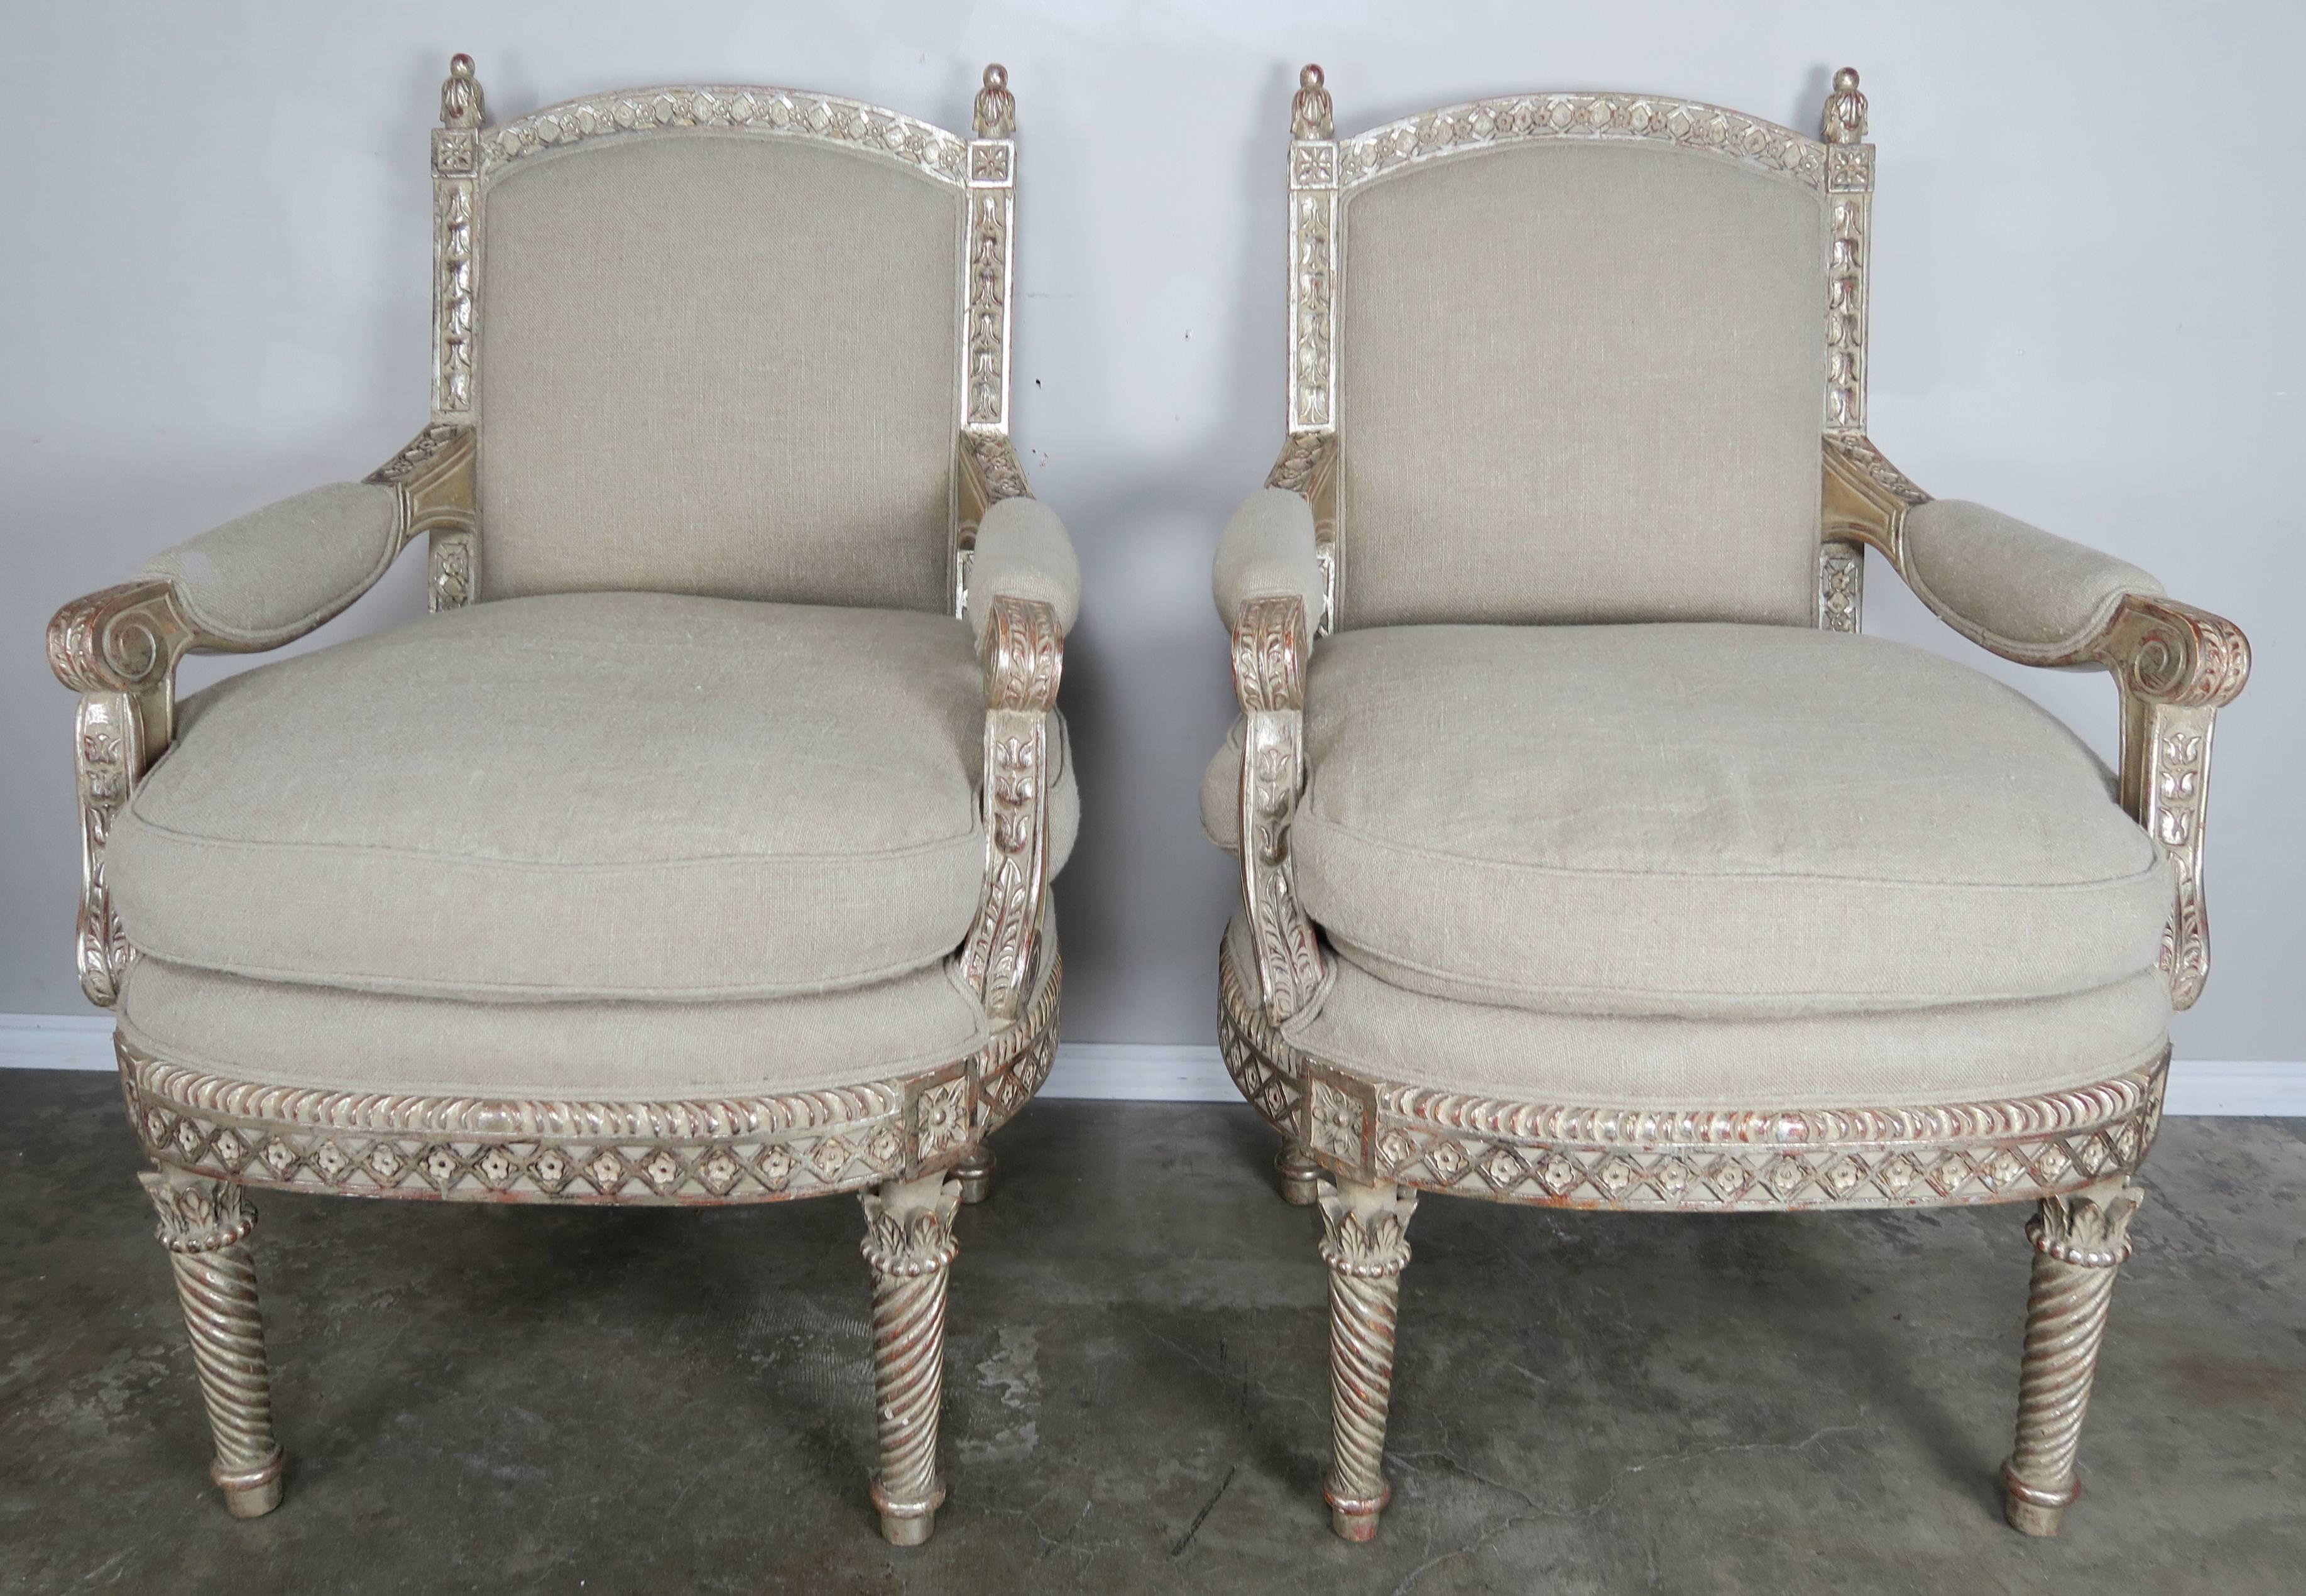 Italian neoclassical style silvered gilt armchairs newly upholstered in a washed Belgium linen with down filled loose seat cushions. The intricately carved neoclassical style armchairs stand on four straight legs. Great armchairs for both